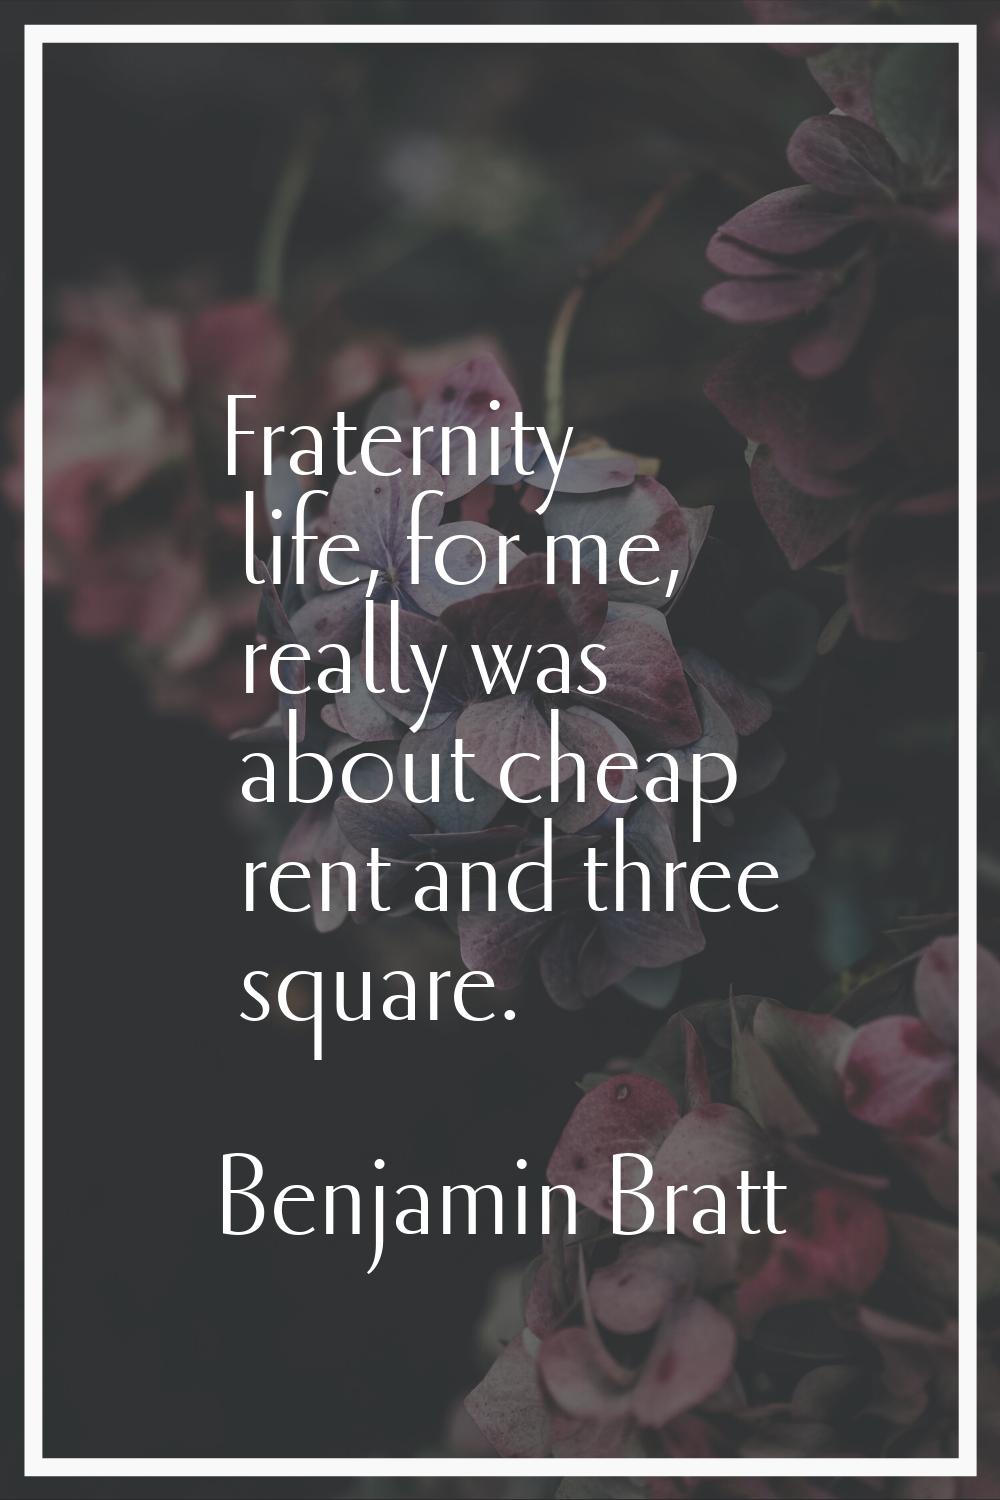 Fraternity life, for me, really was about cheap rent and three square.